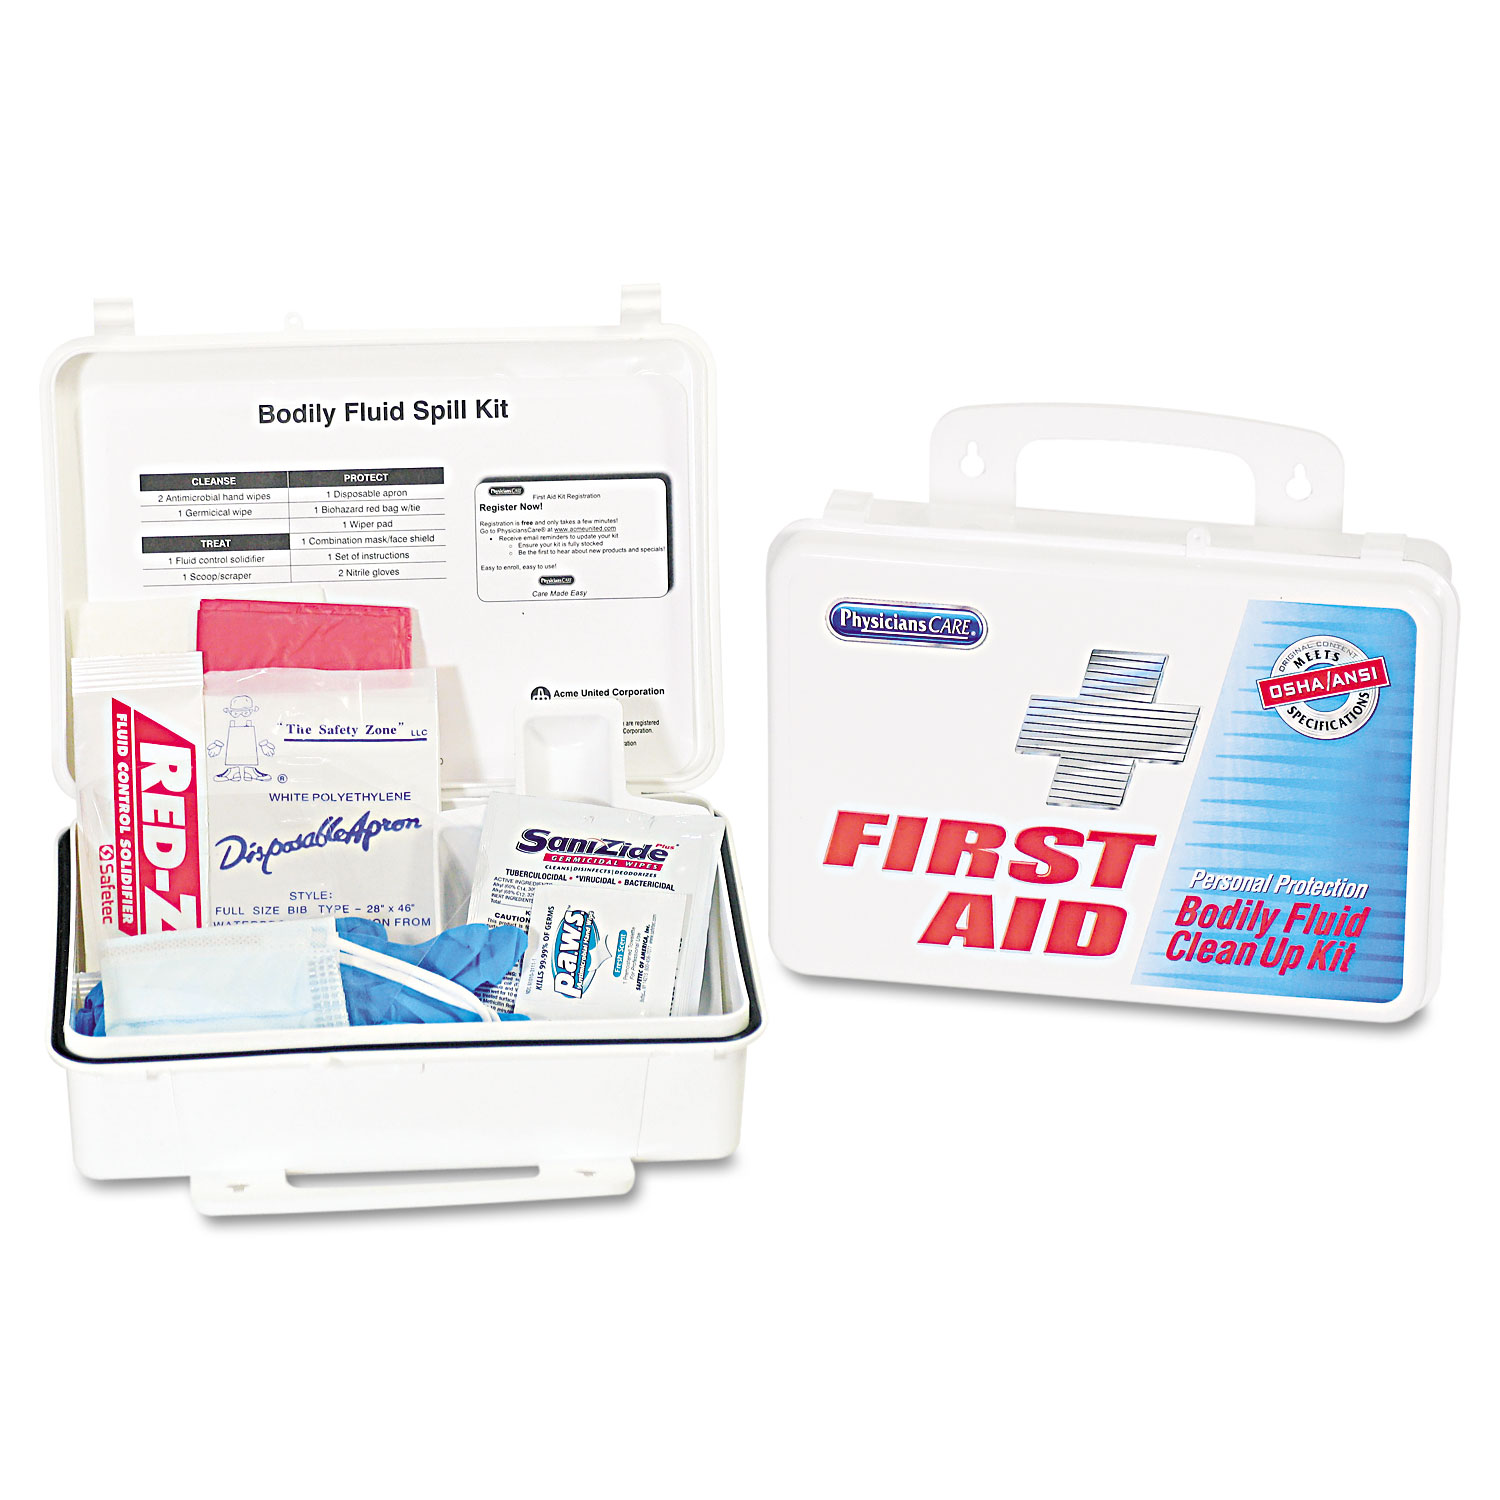 Emergency First Aid Bodily Fluid Spill Kit, 1 Kit